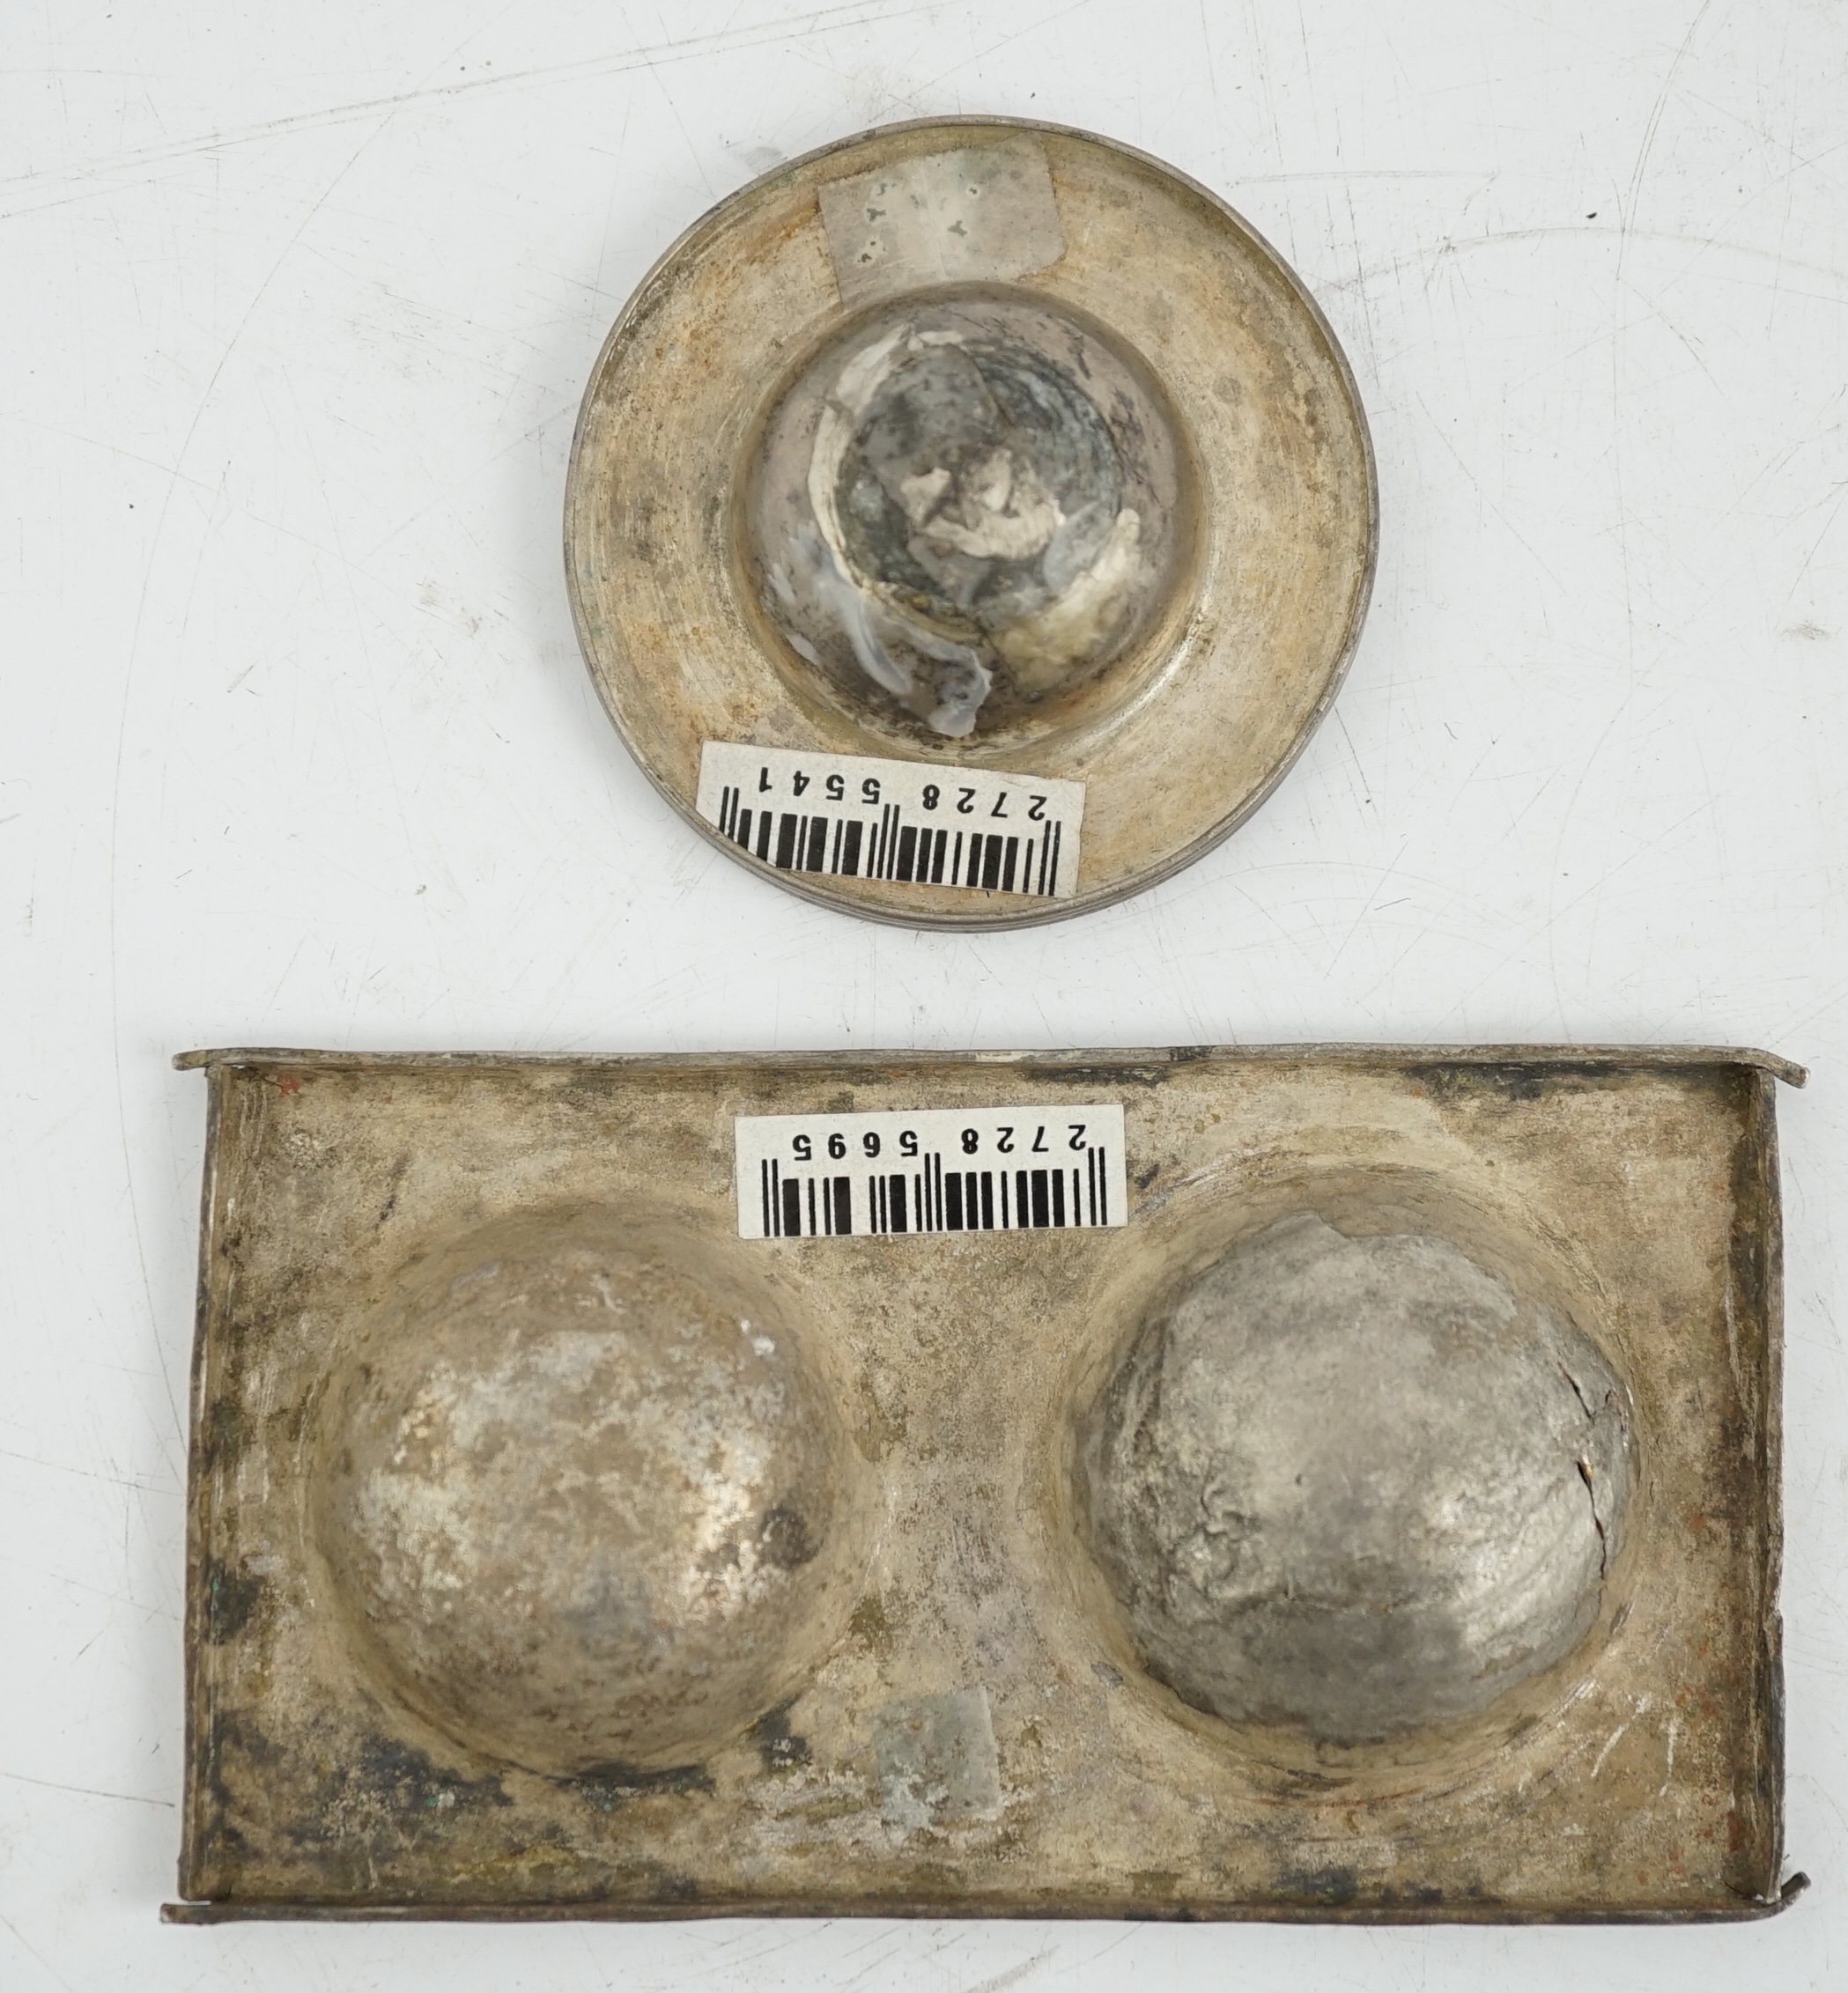 A silver tray and cup, Roman or Gandhara, c. late 1st century BC - early 1st century A.D.